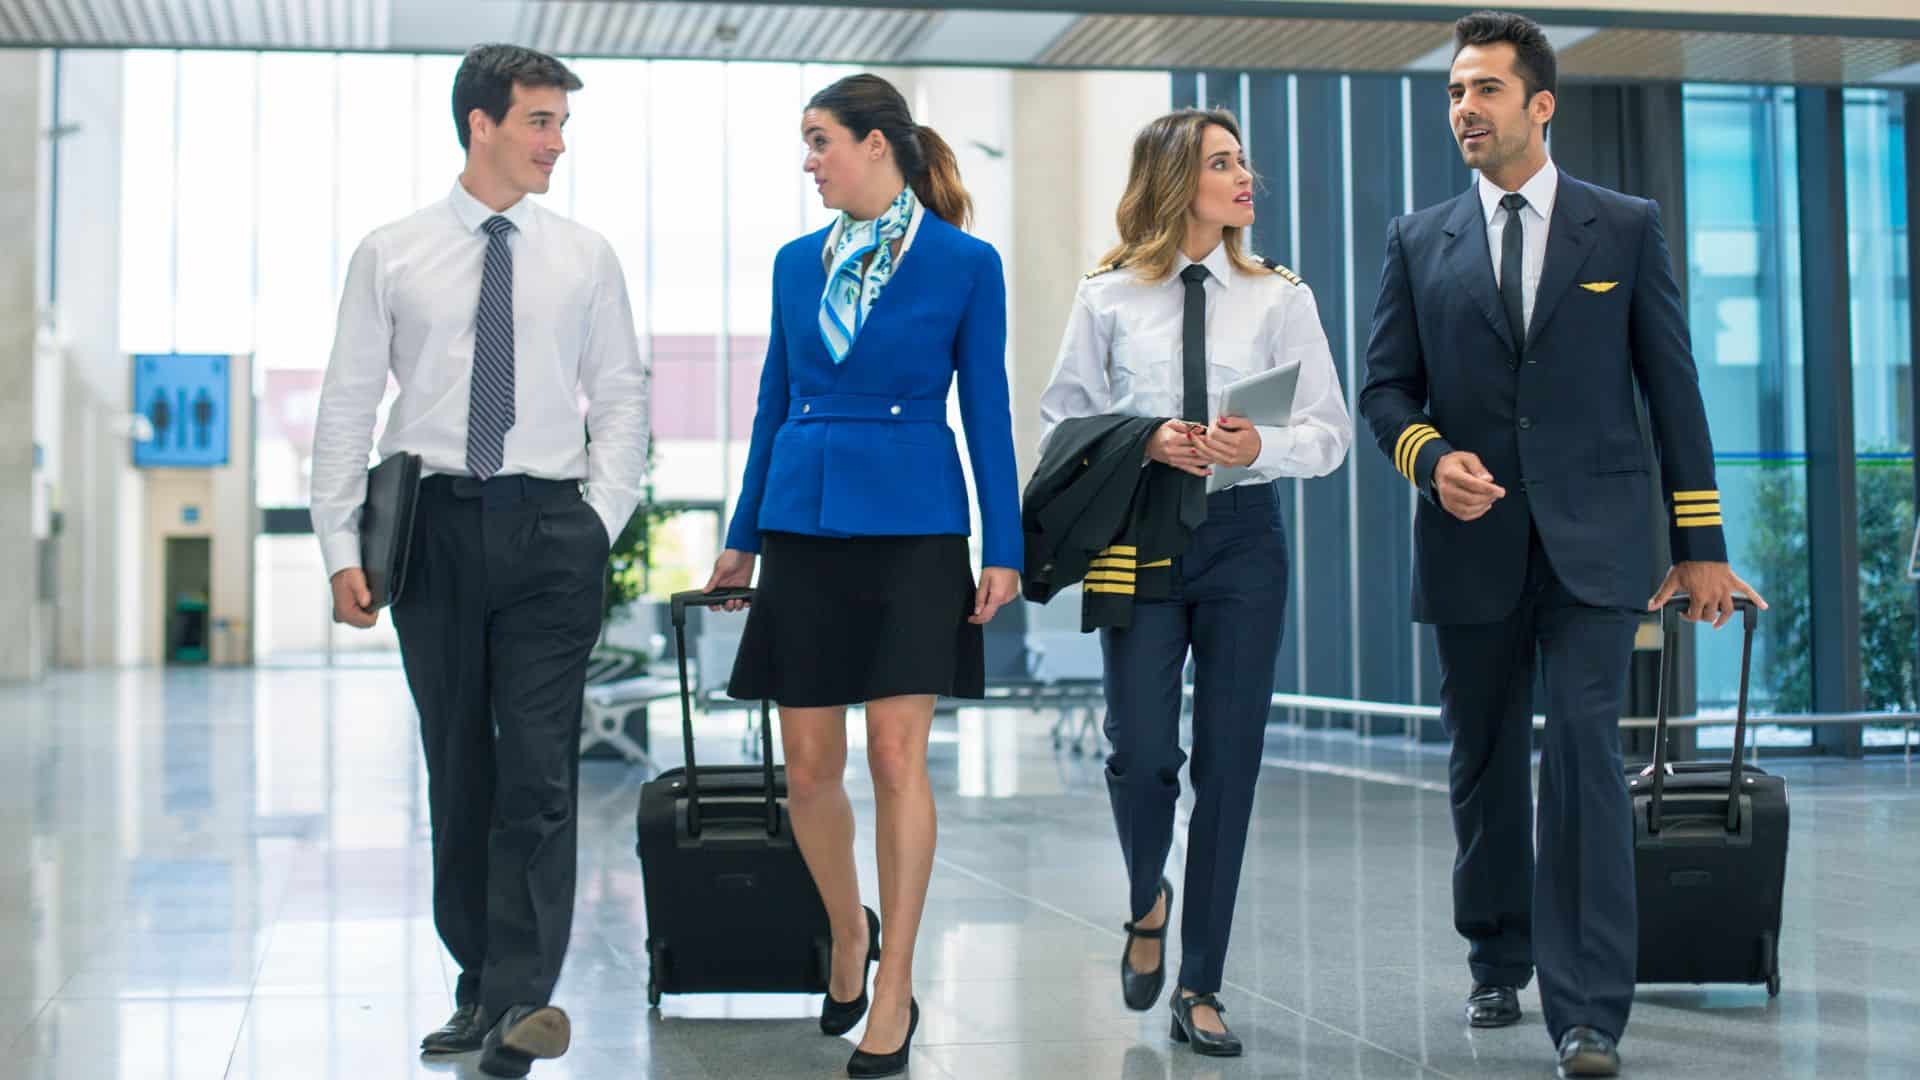 Interfering with Flight Crew Charges